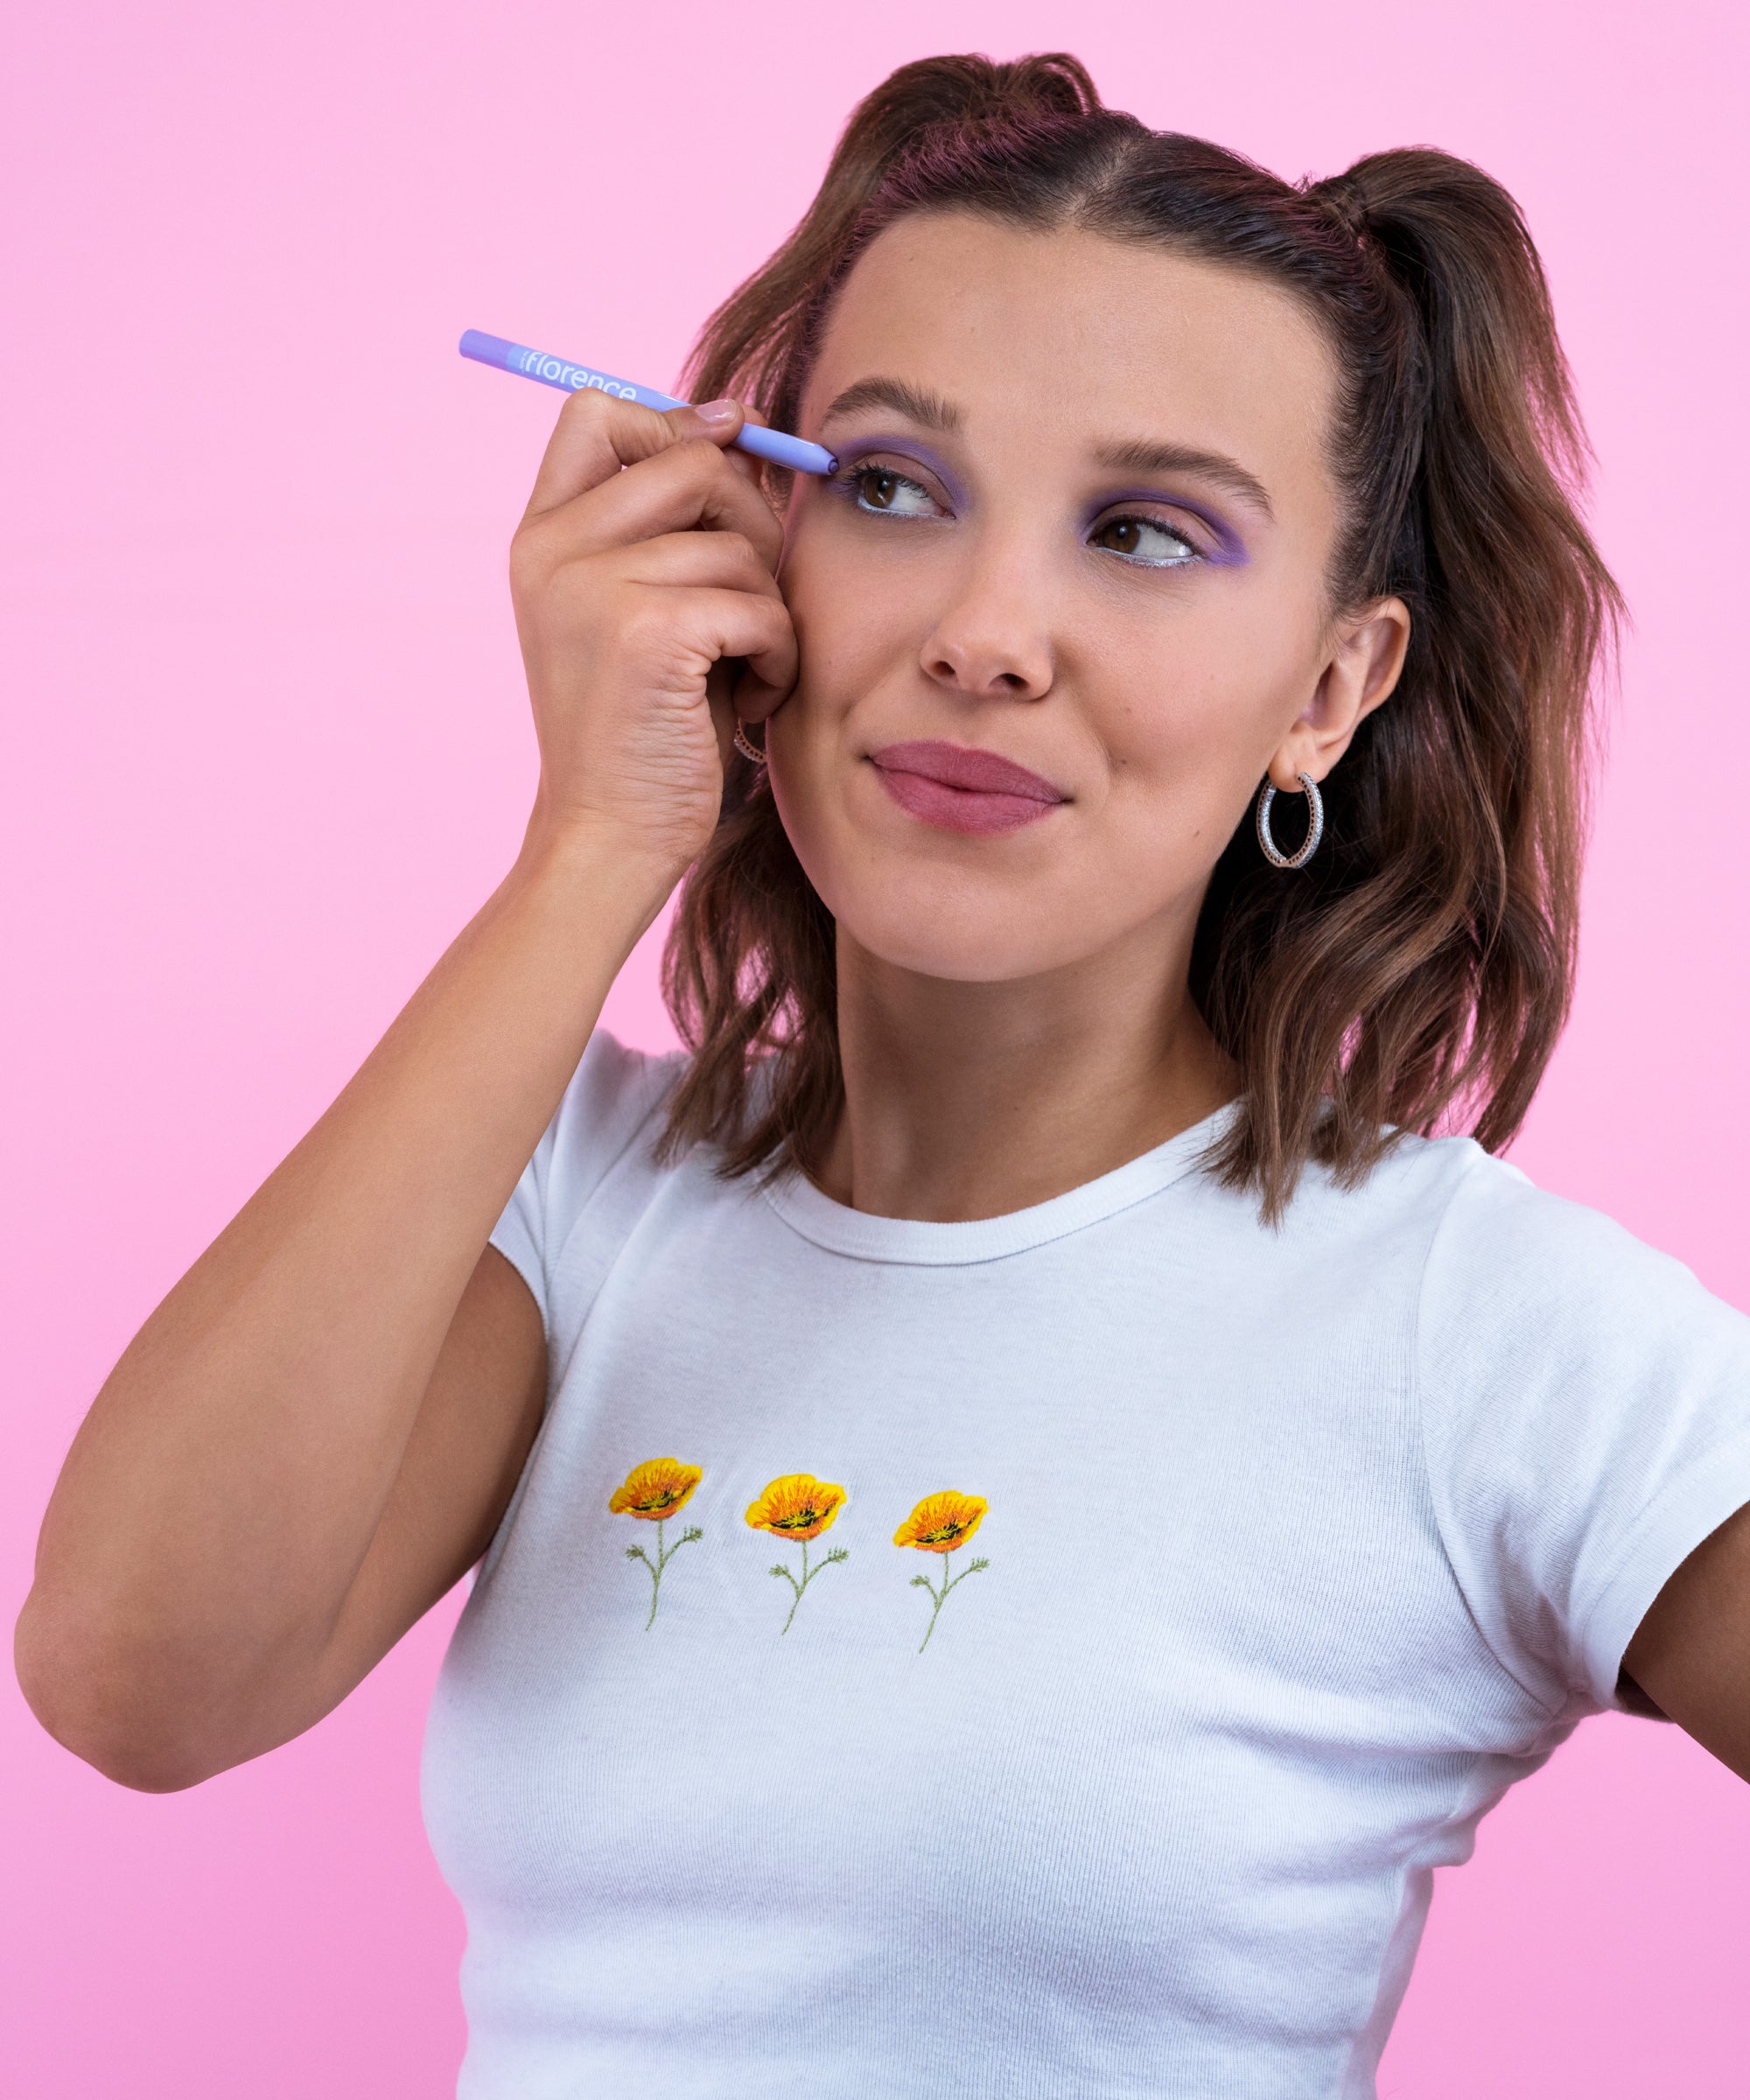 Millie Bobby Brown and Her “Love/Hate Relationship” With Beauty and